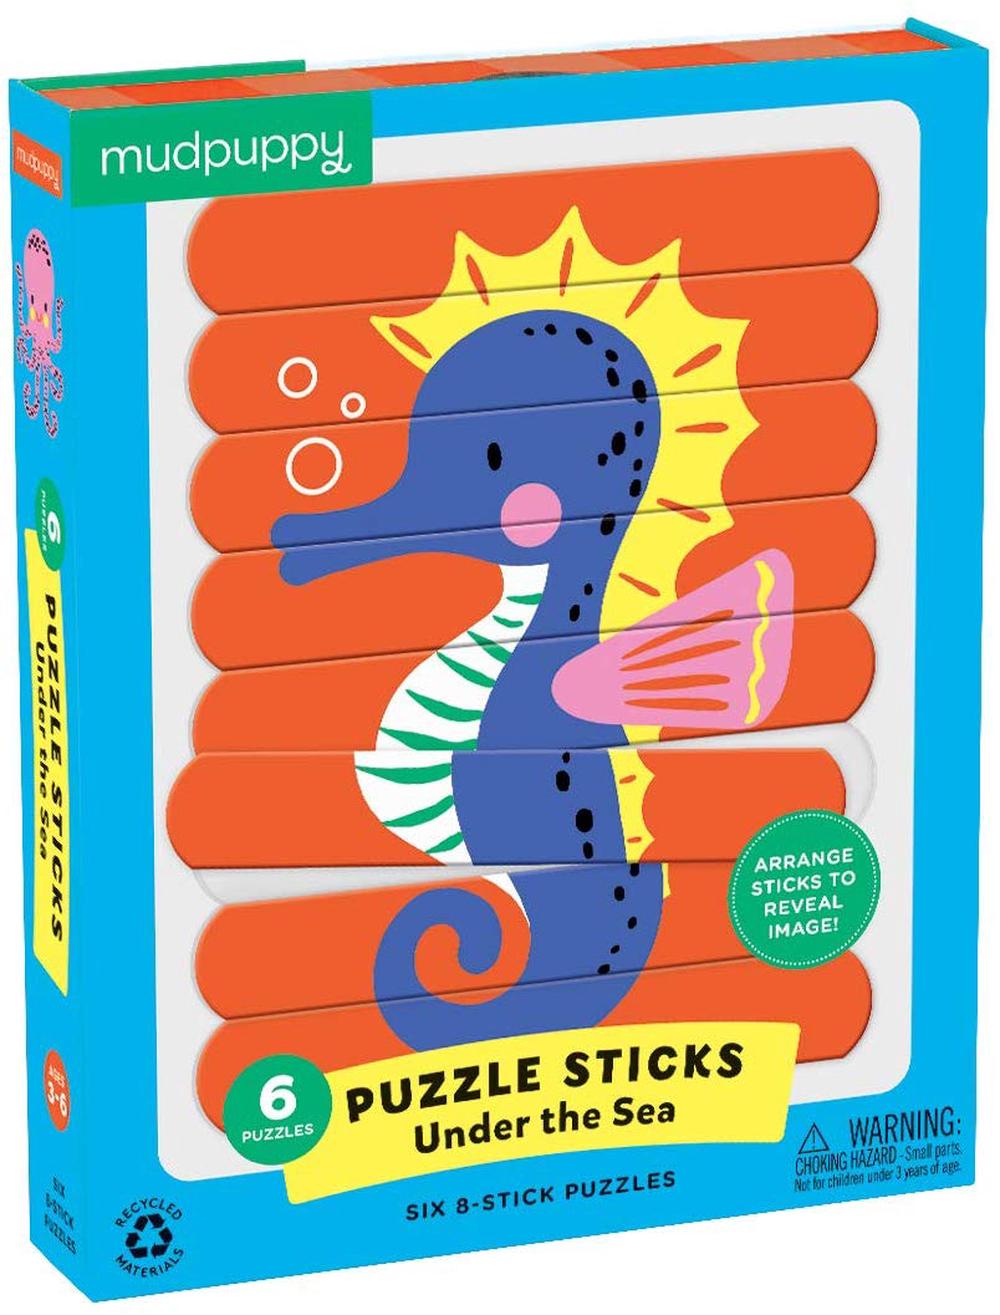 Mudpuppy Under the Sea Puzzle Sticks | Buy online at The Nile